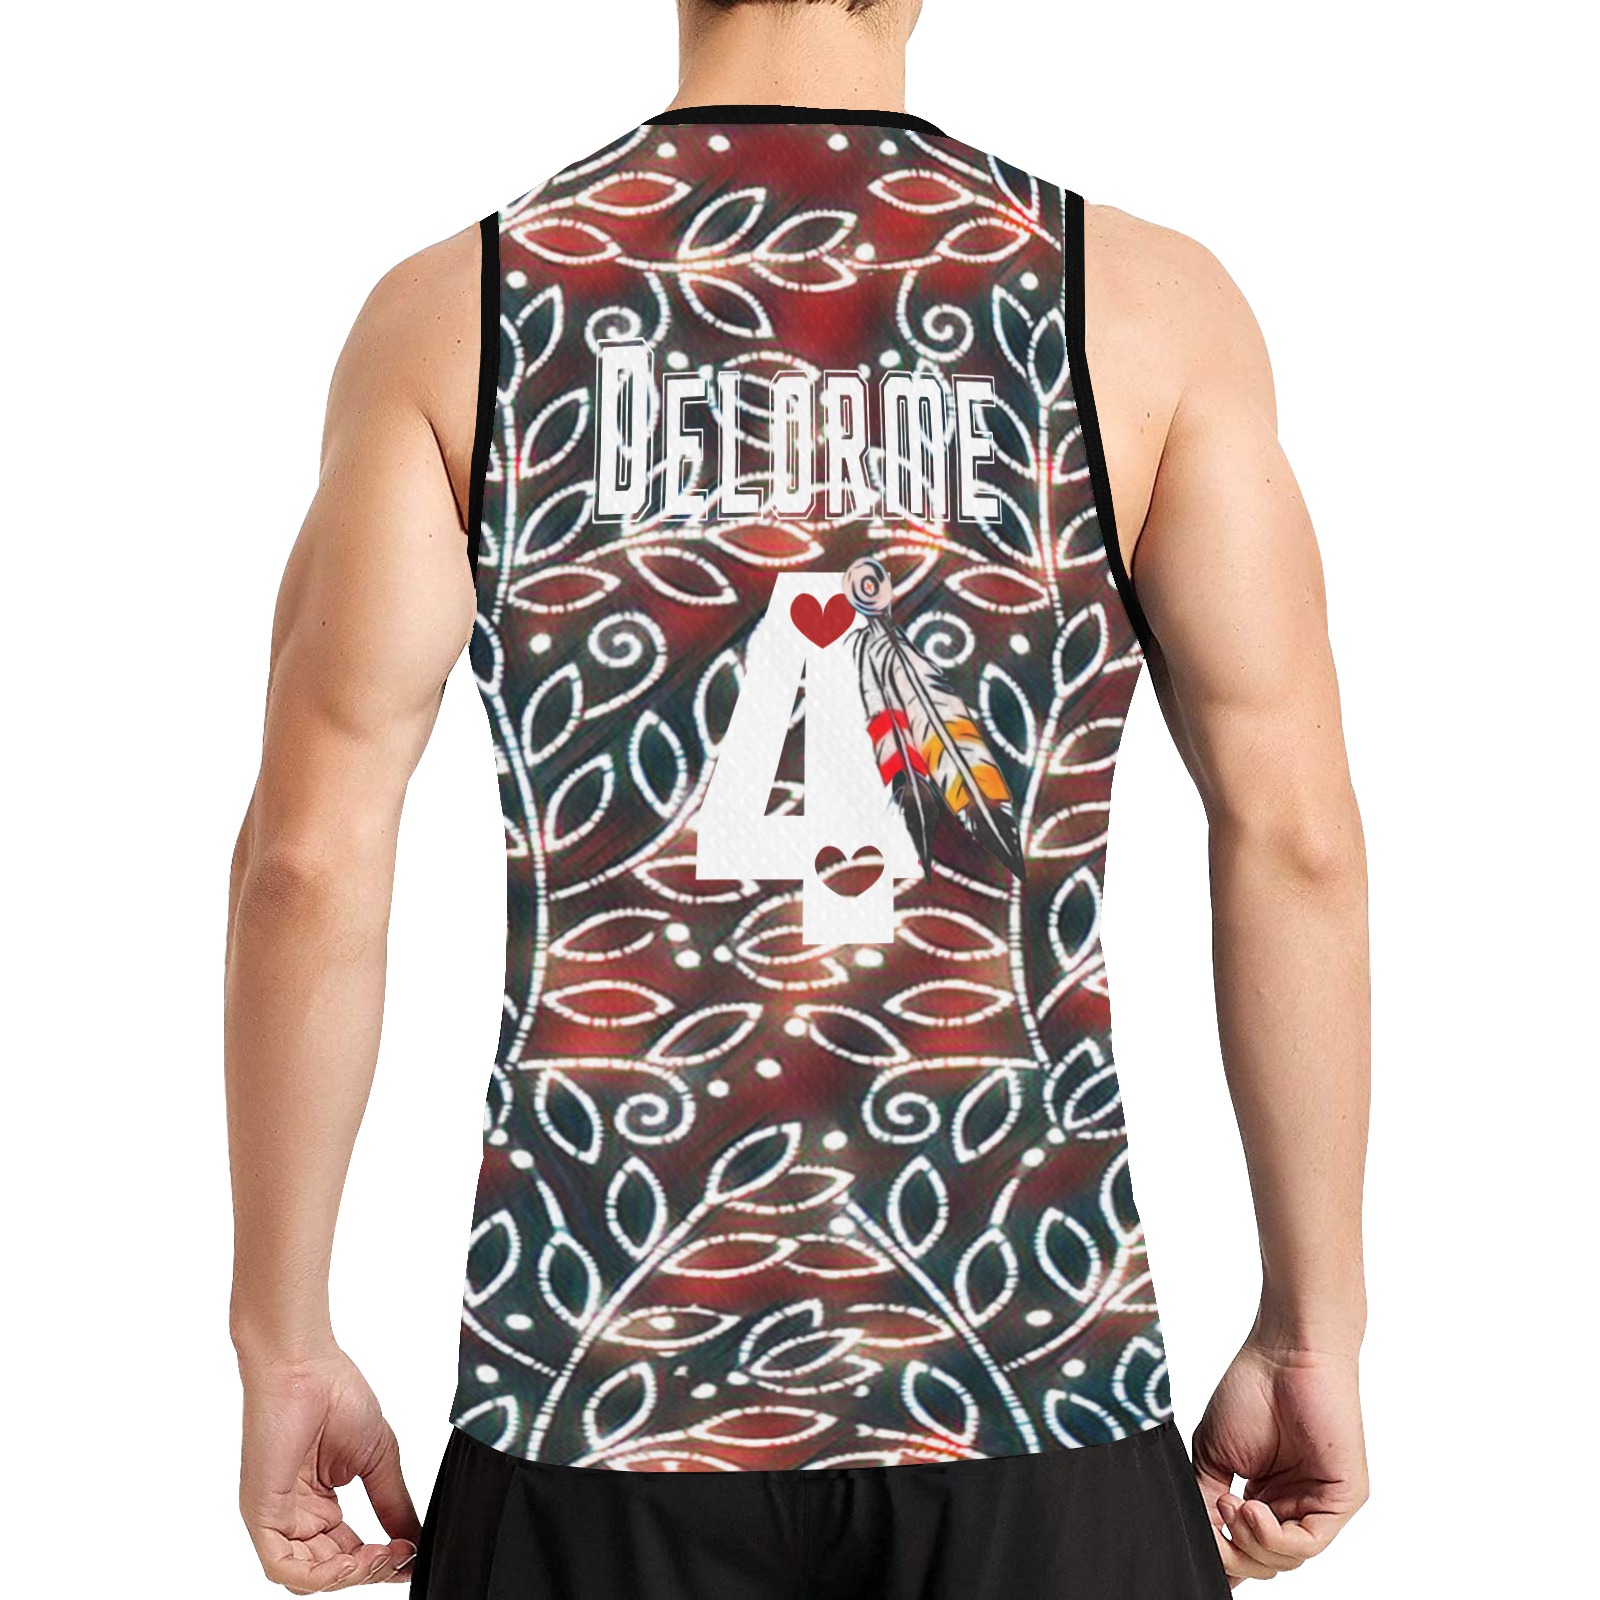 MMIW jersey delorme All Over Print Basketball Jersey